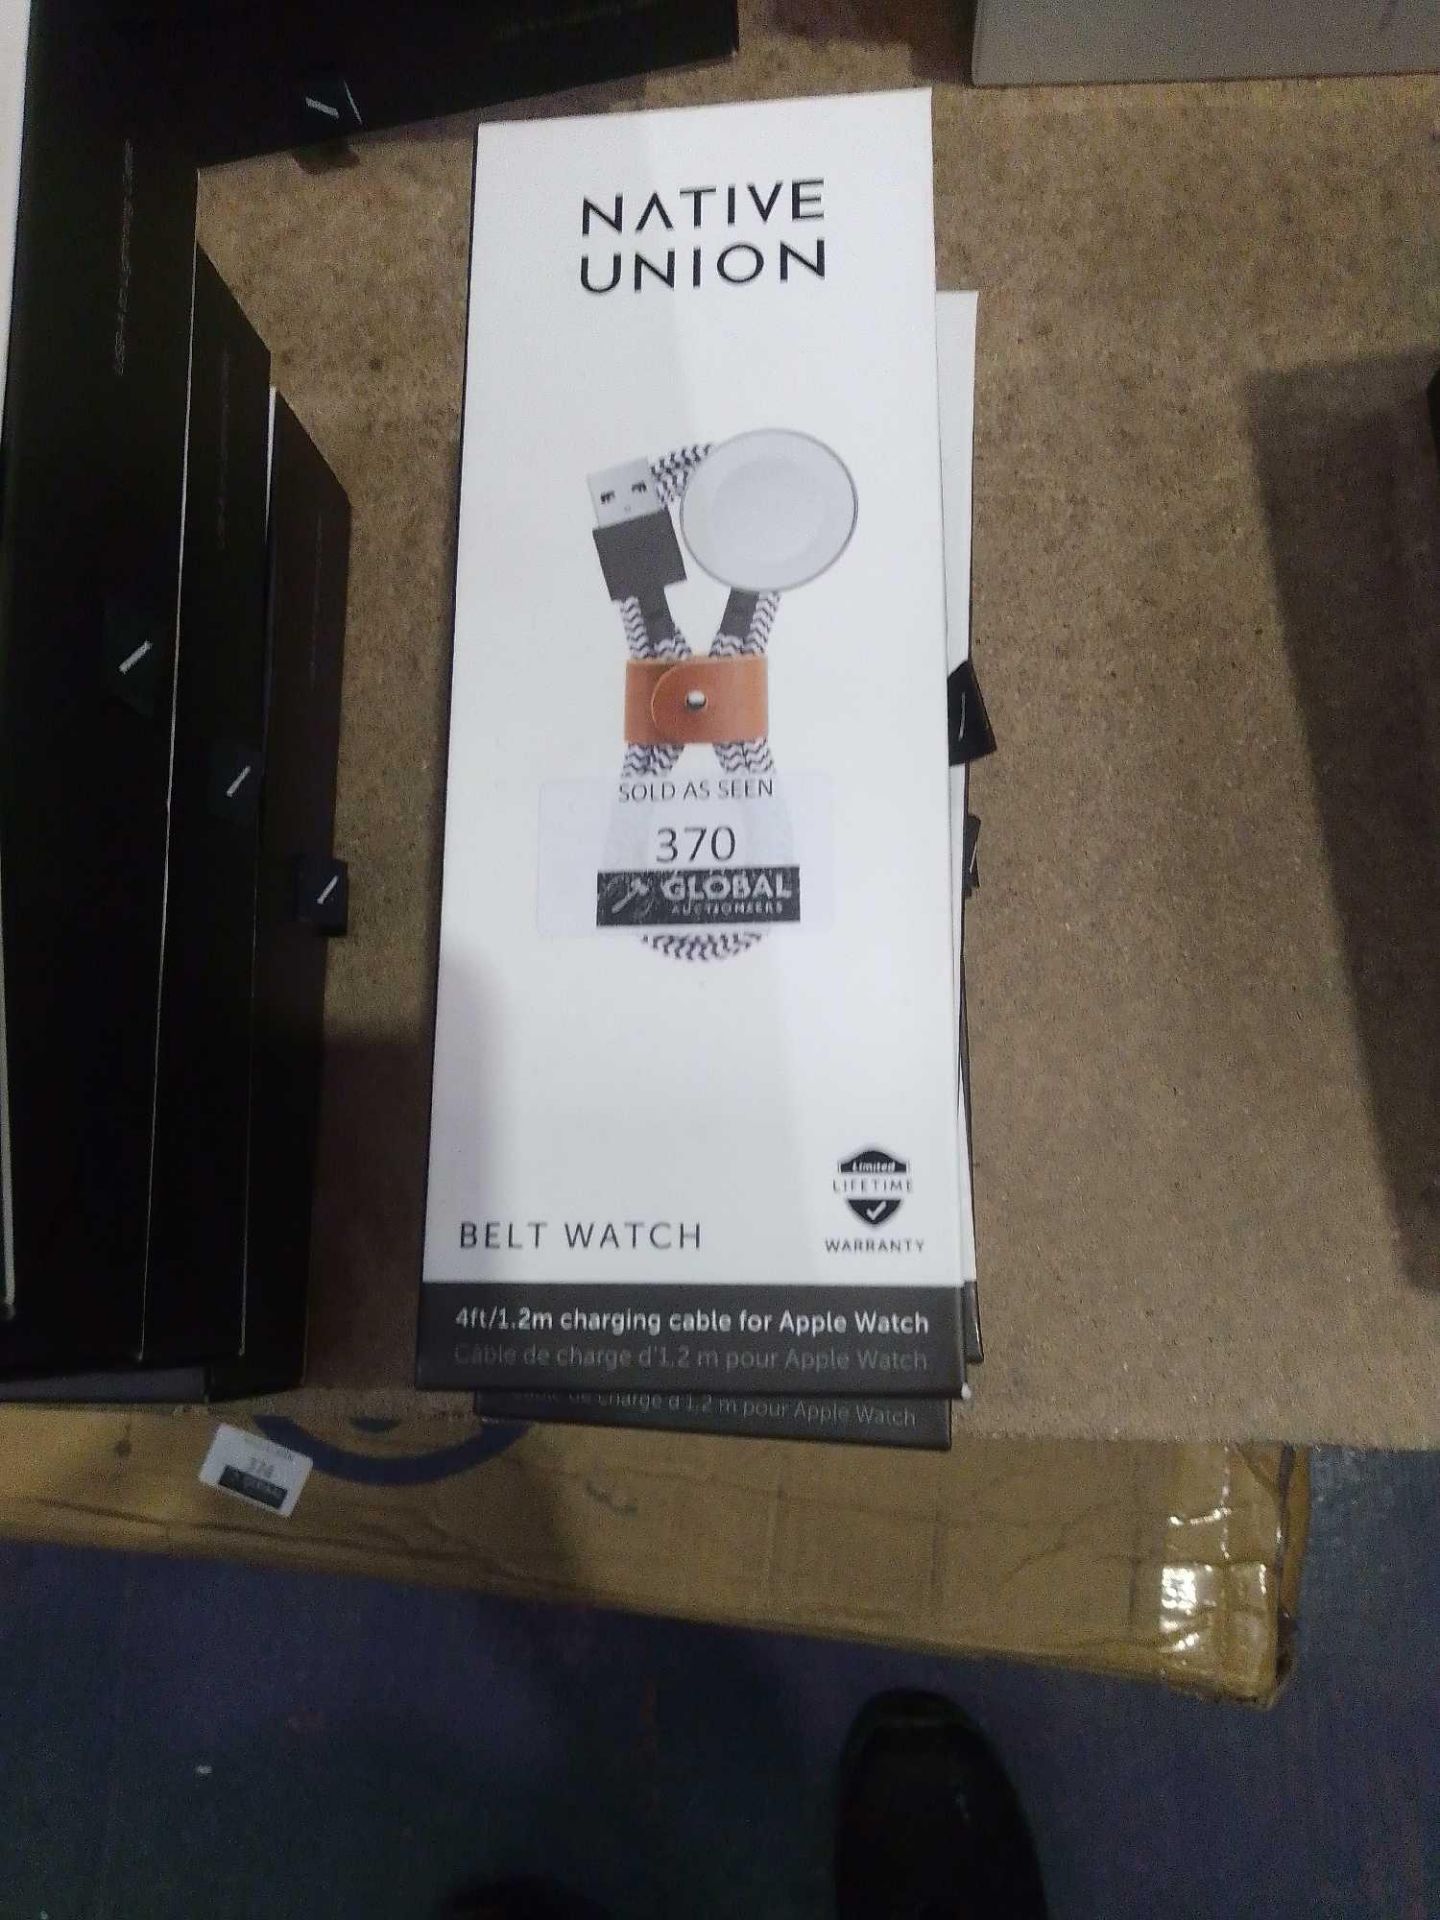 Native Union Belt Watch RRP £120 Contains 3 Boxed Native Union Belt Watch - Image 2 of 2